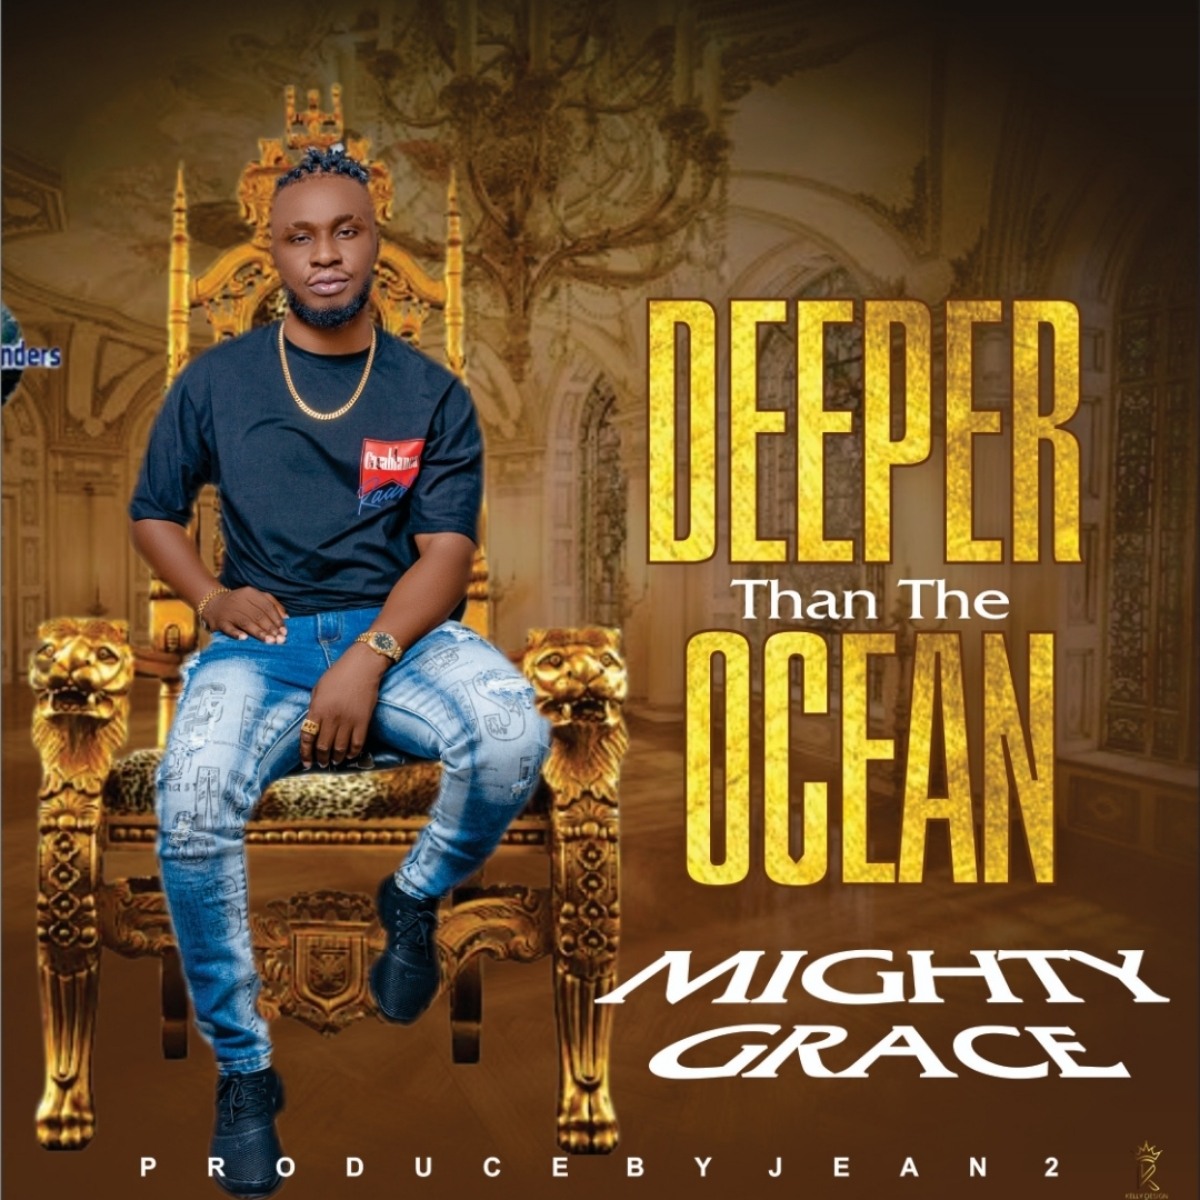 Mighty Grace - Deeper than the Ocean